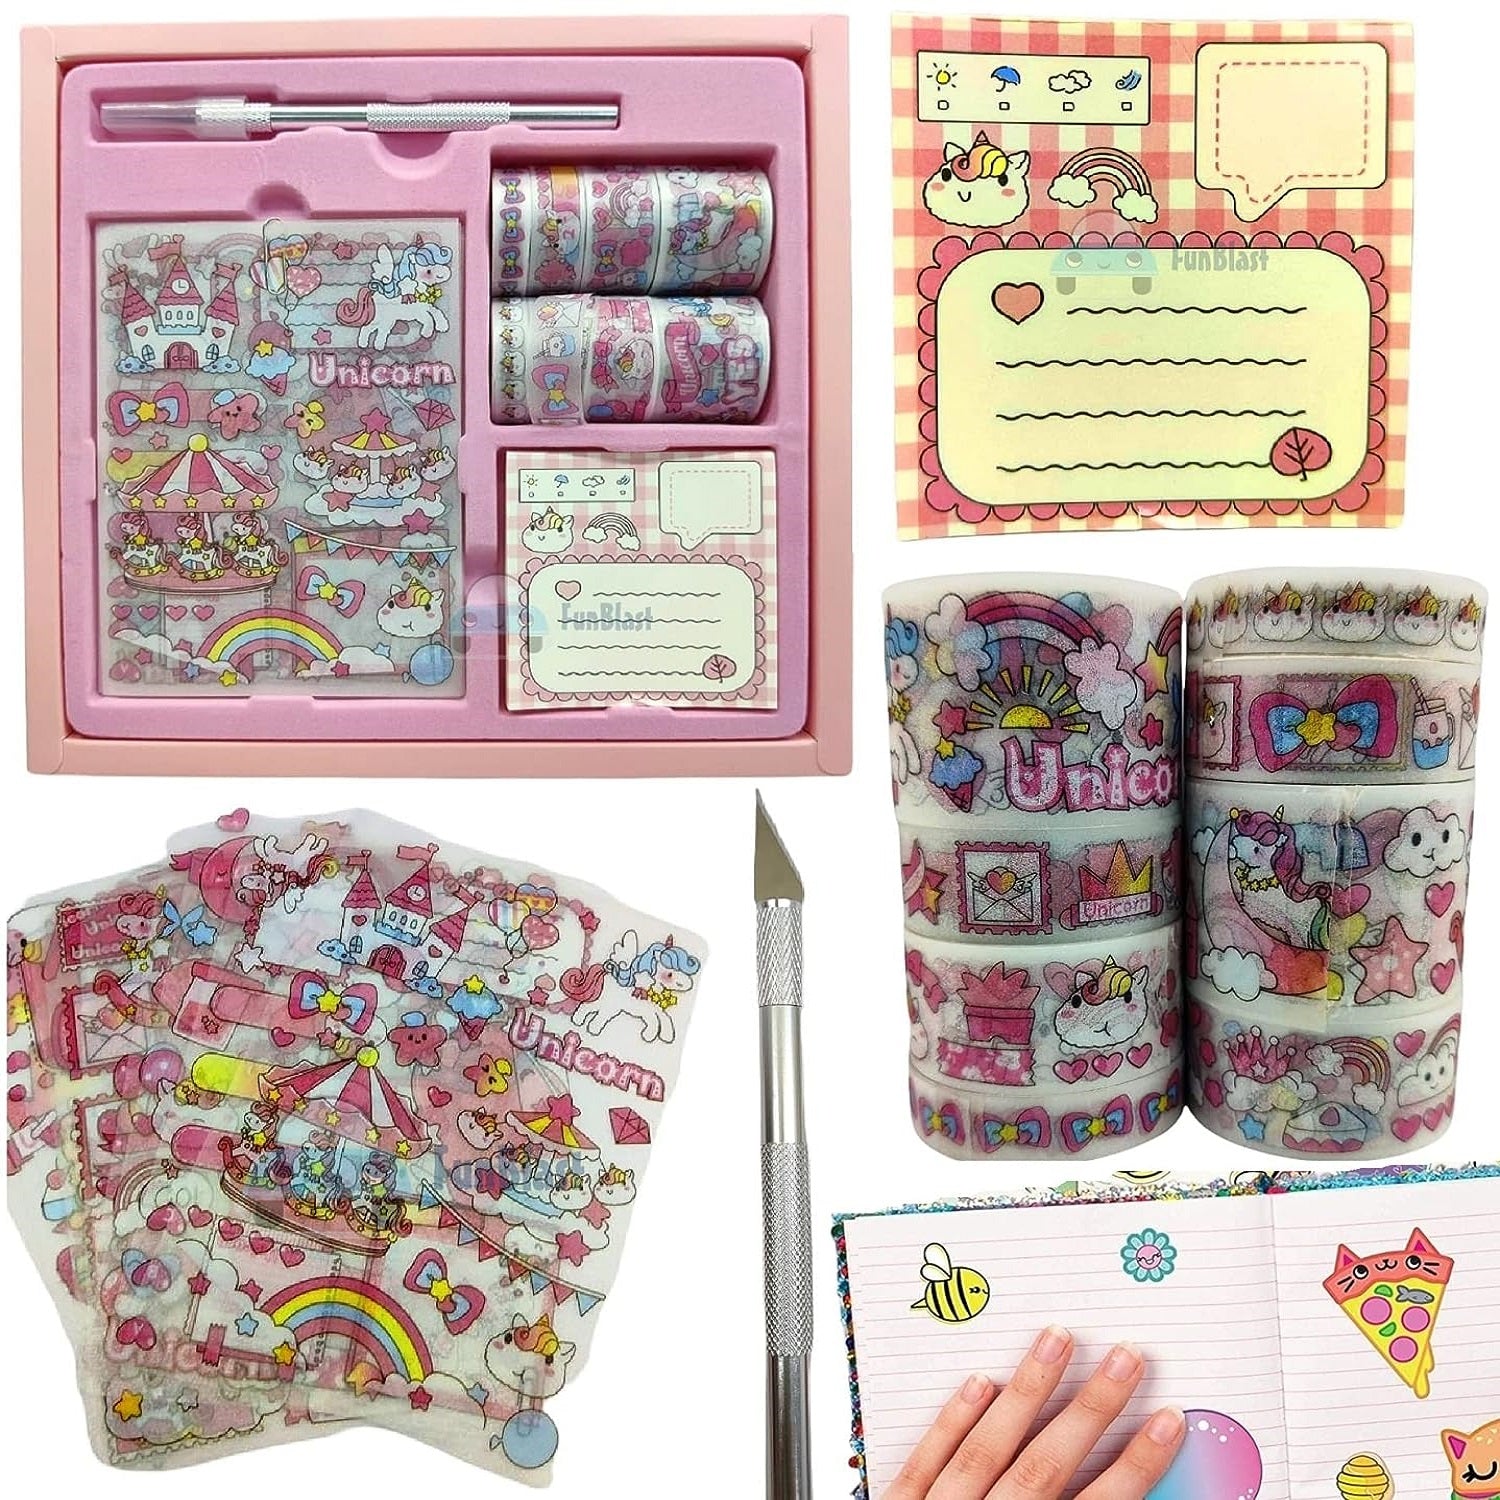 Fayware Aesthetic Washi Tape Set - 6 Pet & Washi Tapes for Journaling, Scrapbooking Supplies, Bullet Journals, Planner, Arts & Crafts. Use As